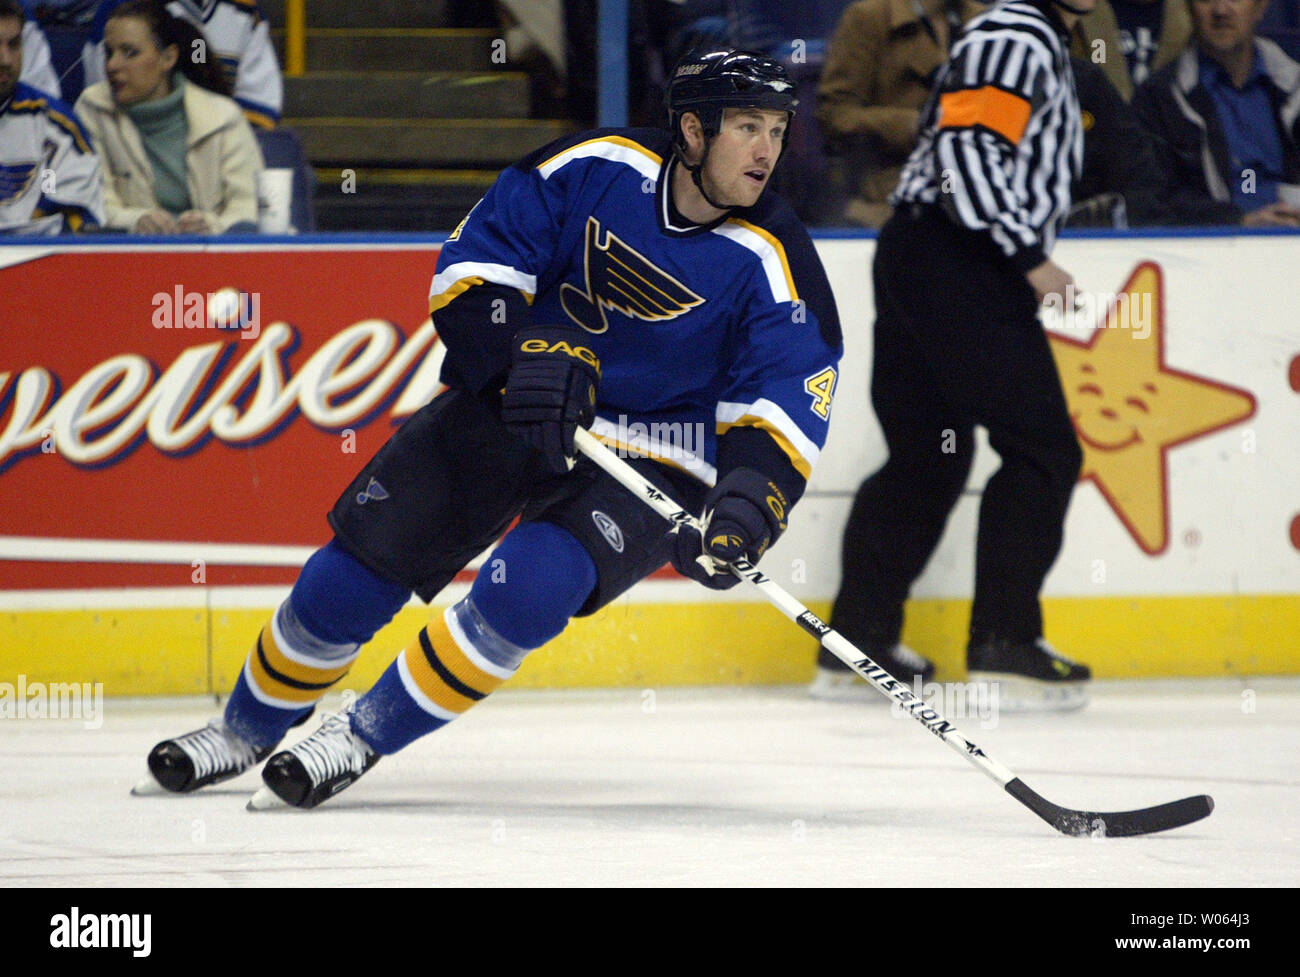 Columbus Blue Jackets Sergei Fedorov waits for a pass during the first  period against the St. Louis Blues at the Savvis Center in St. Louis on  March 31, 2005. (UPI Photo/Bill Greenblatt